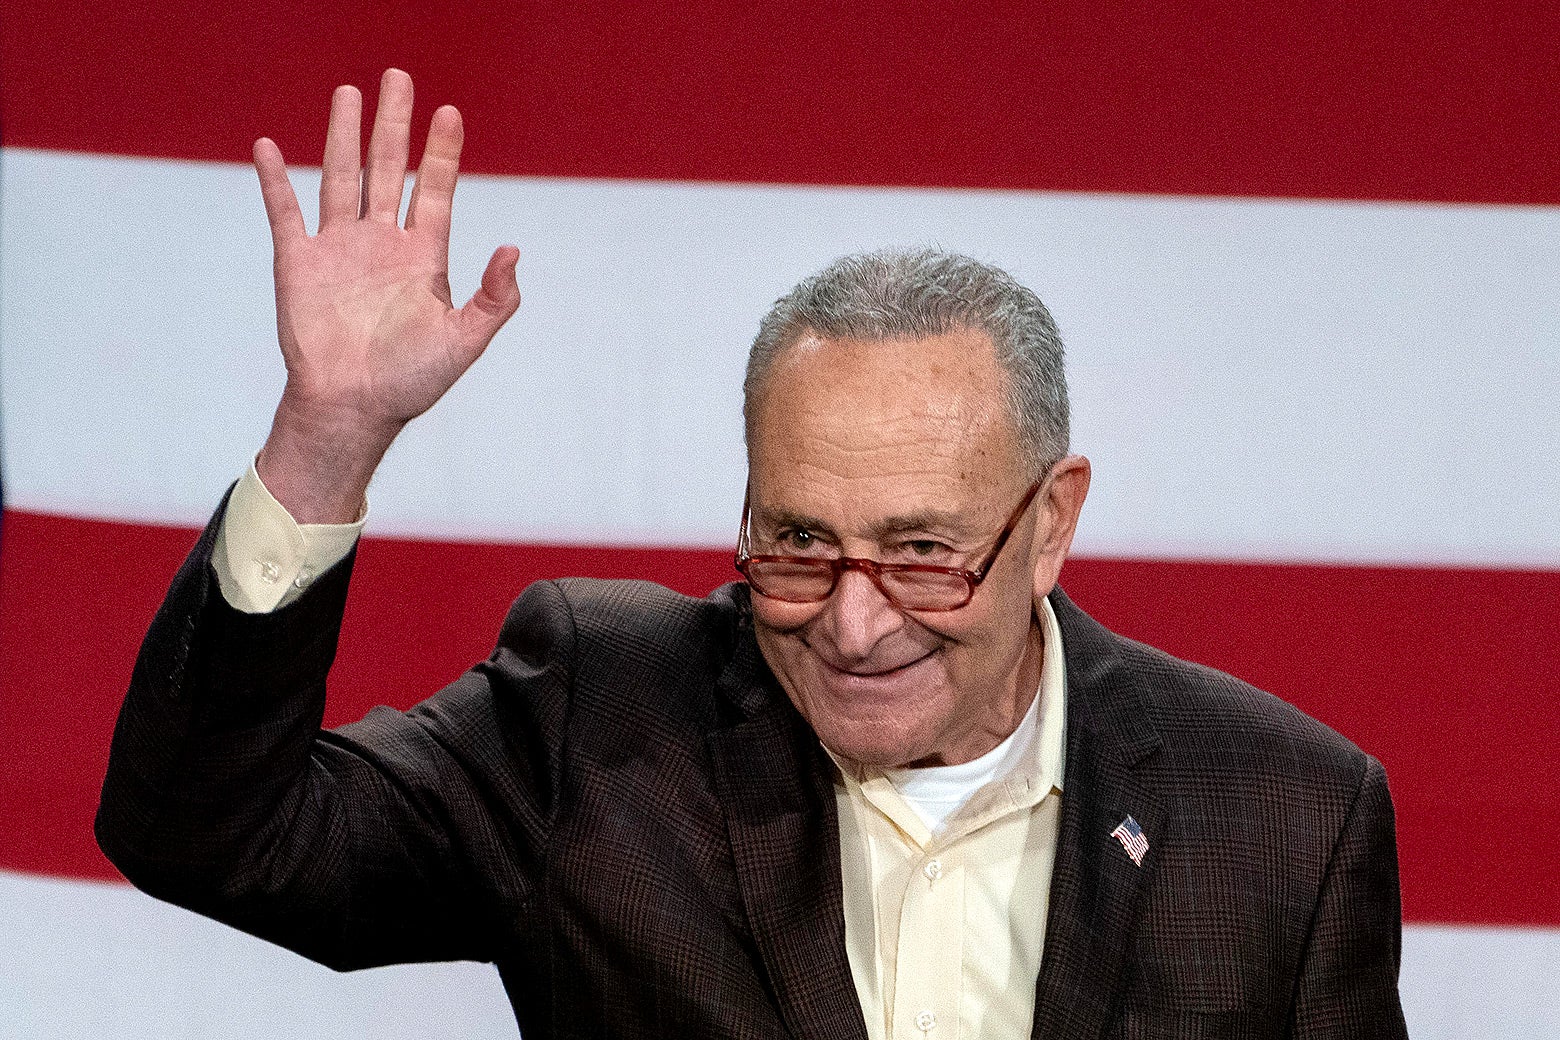 Chuck Schumer waving in front of an American flag.